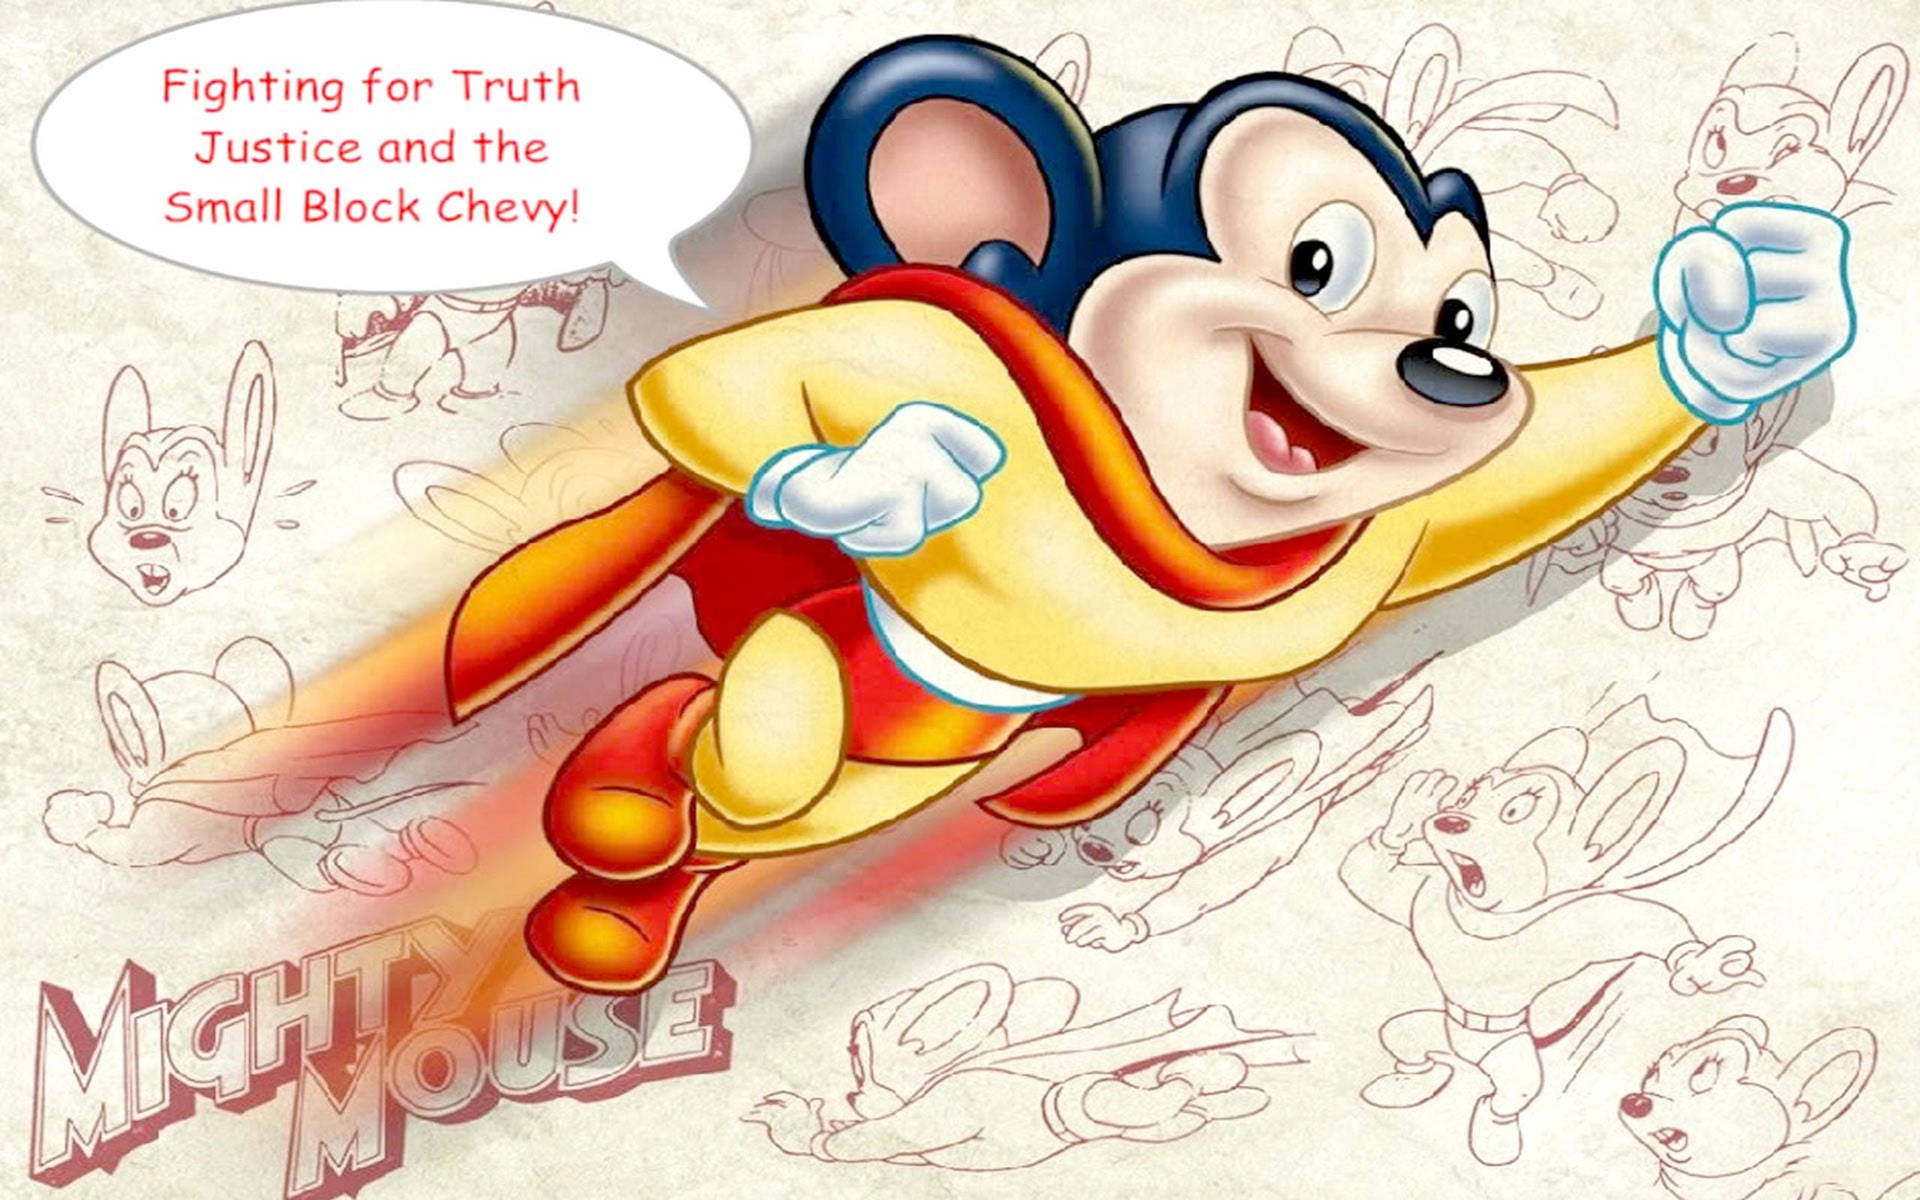 Mighty Mouse Fighting For Truth Background